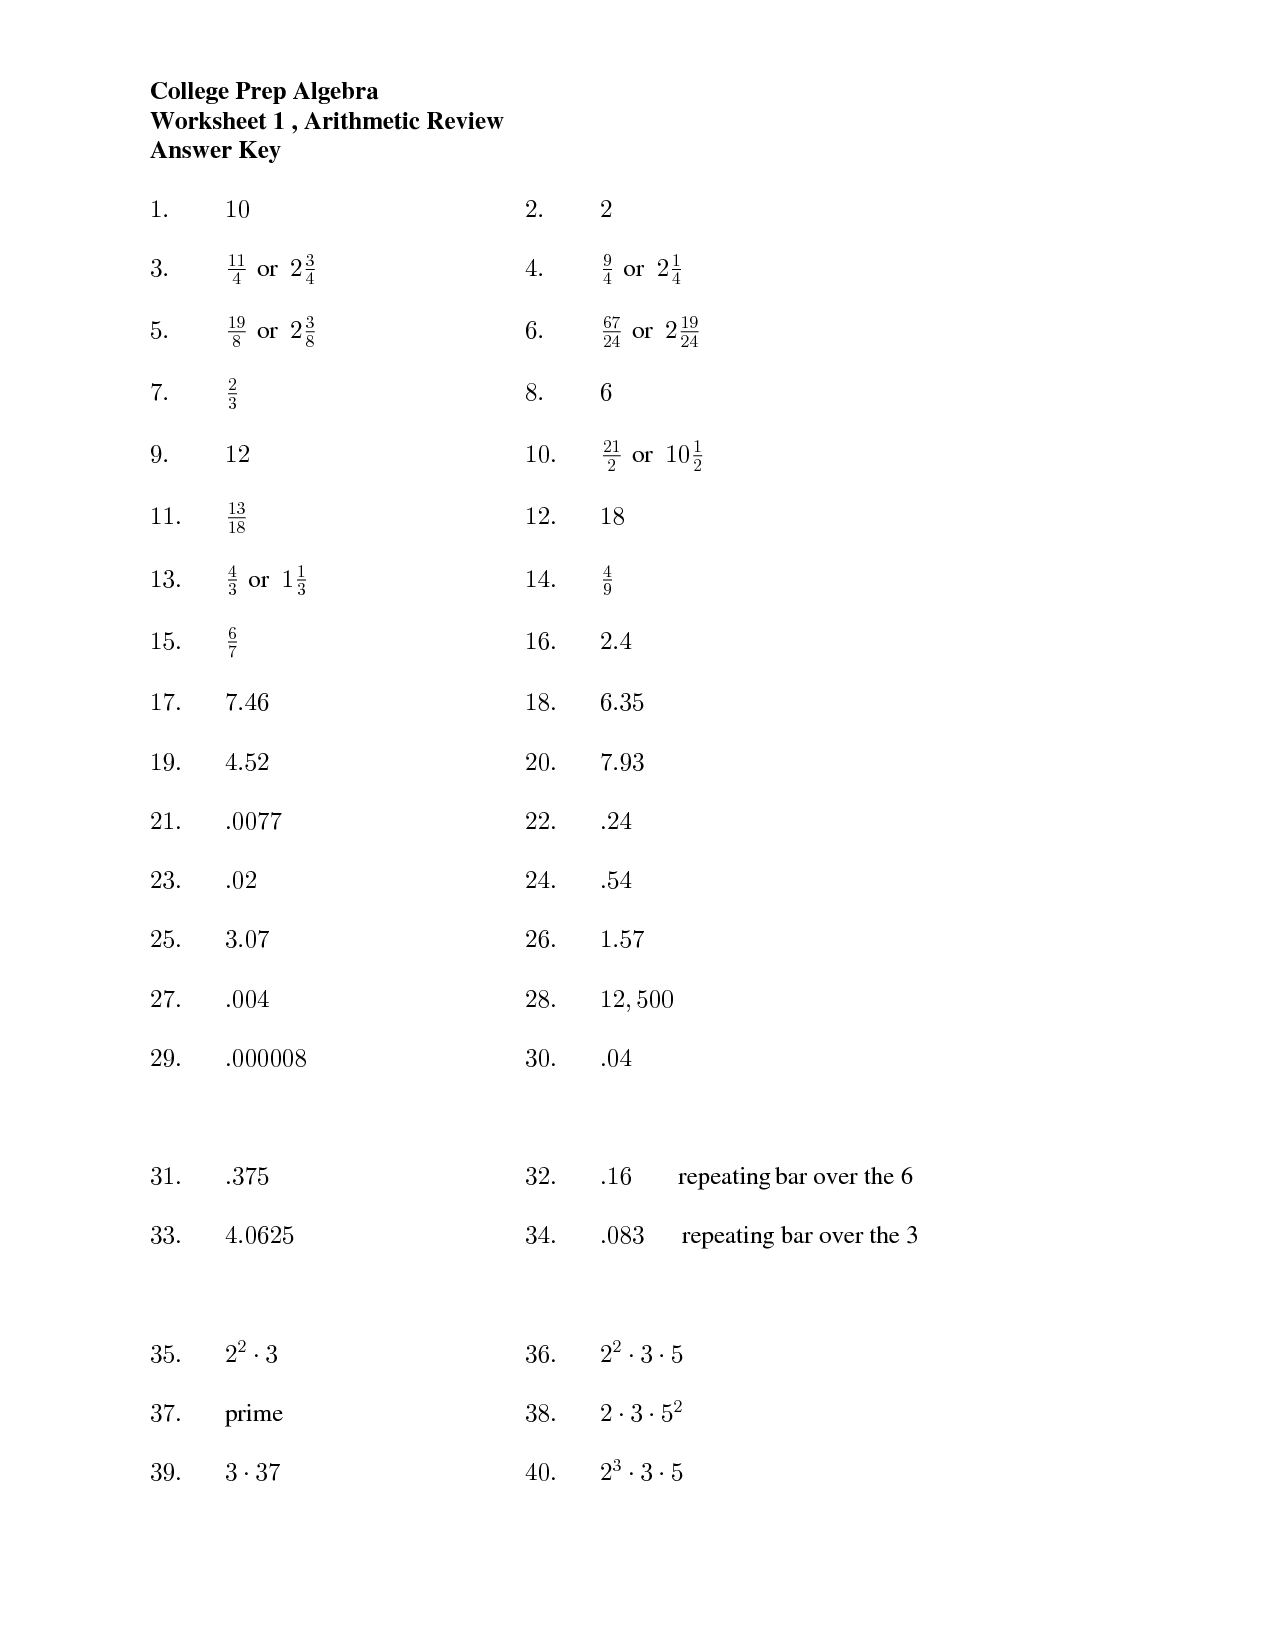 College Algebra Worksheets with Answers Image